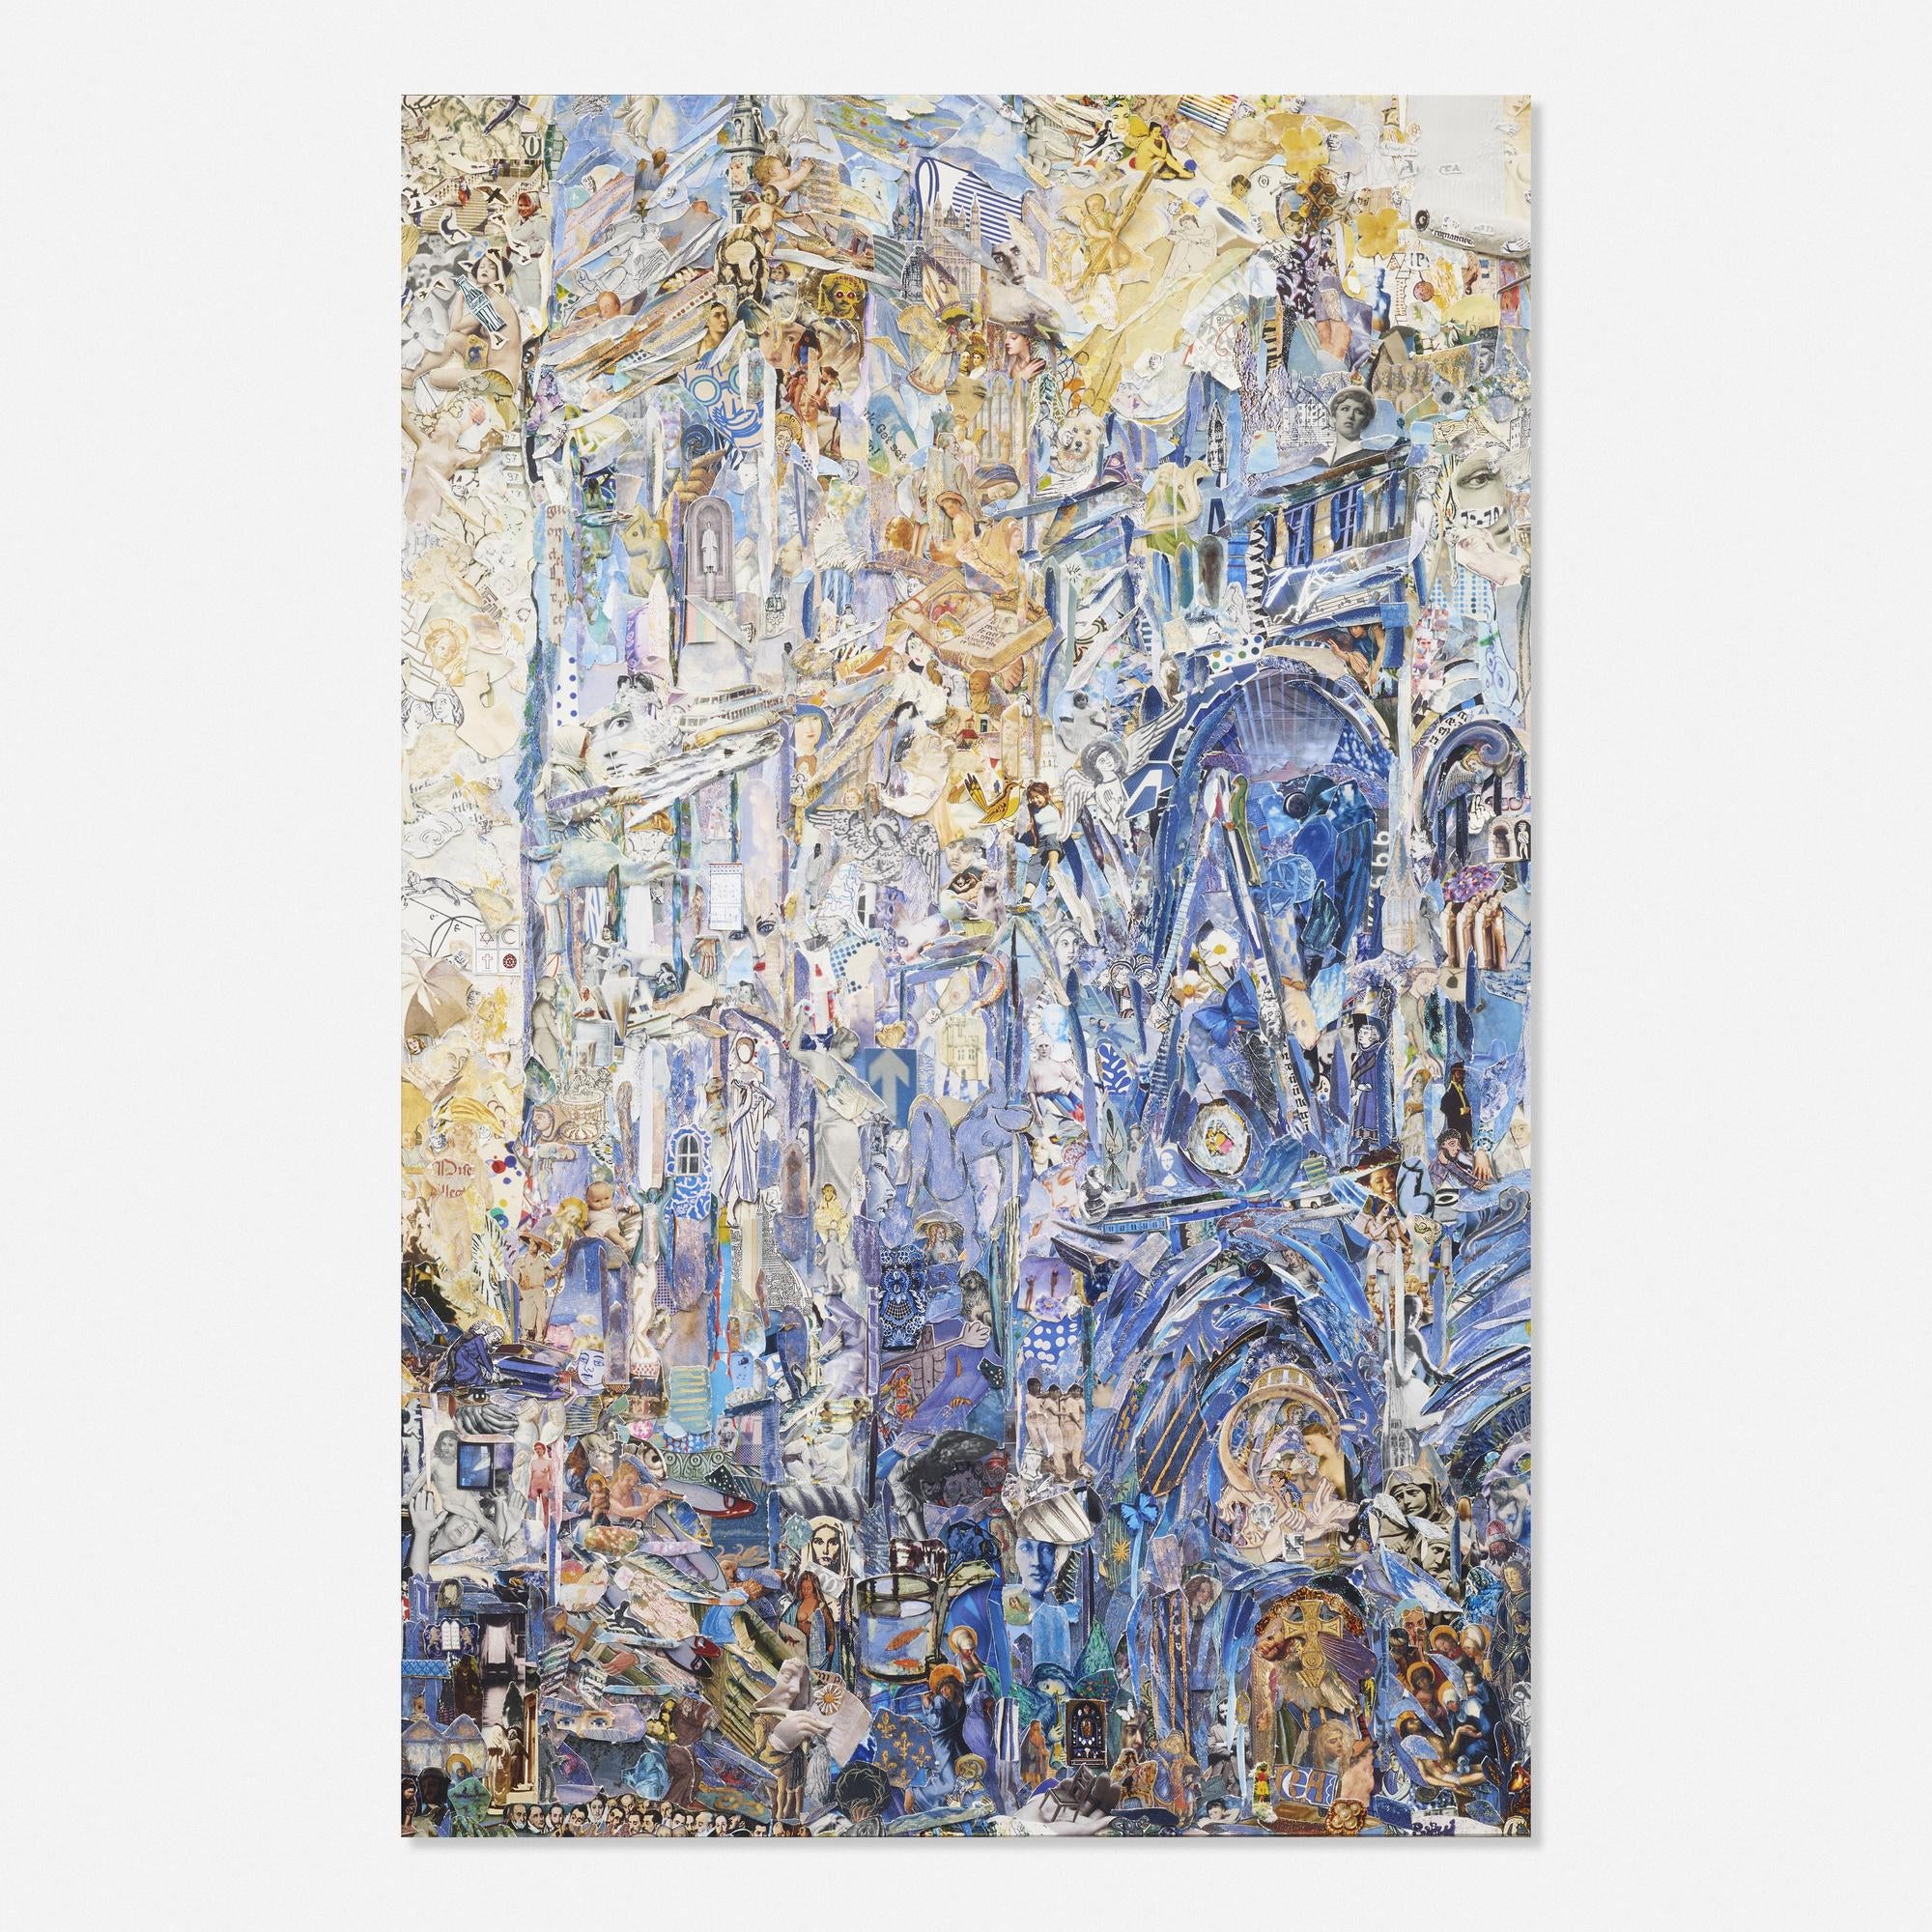 Rouen Cathedral (Monet or the Triumph of Impressionism, Daniel Wildenstein) p. 290. The Portal and the Tour D'Albane (Morning Effect), 1893 Series of Repro